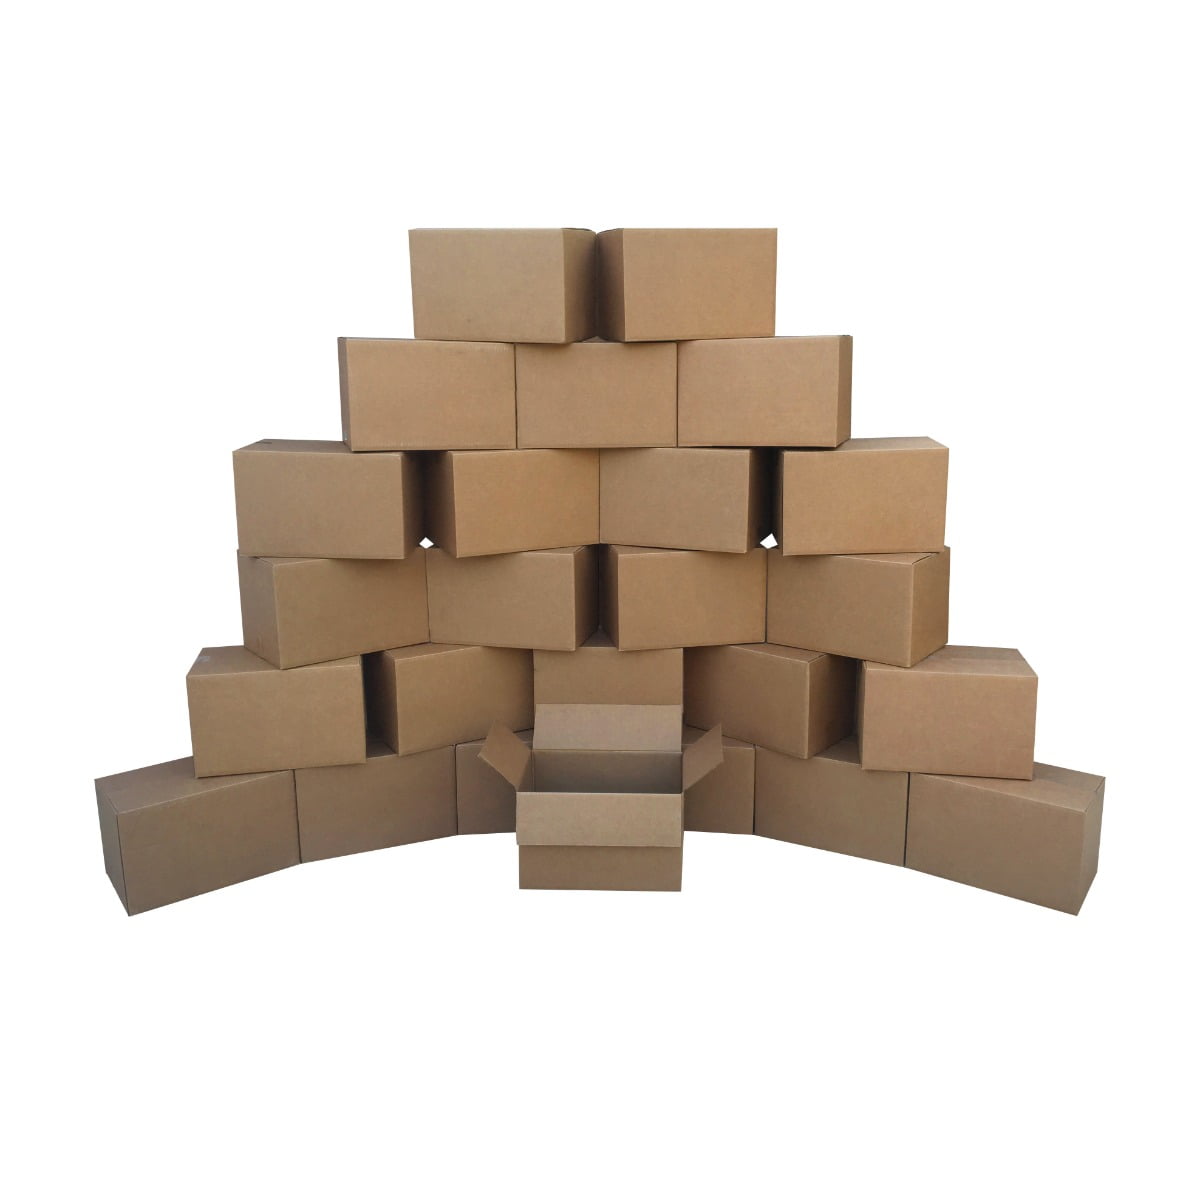 Black Packaging Cardboard Boxes Moving Mailing Packing Box Hoikwo 25 Pack 4x4x2 Small Shipping Boxes for Small Business